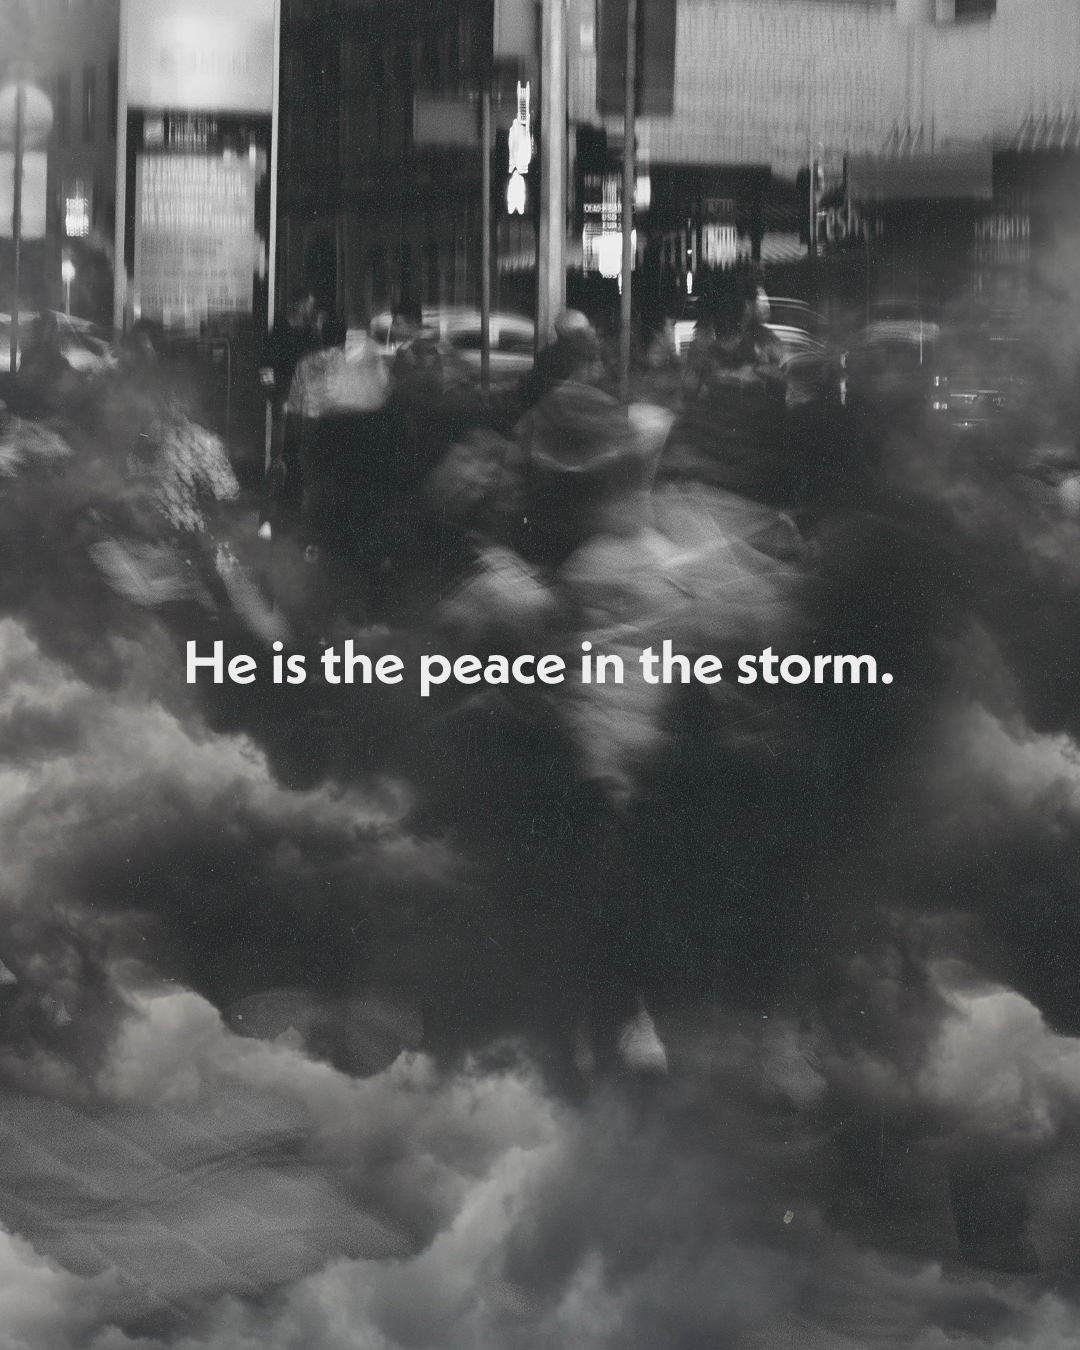 He is the peace in the storm.